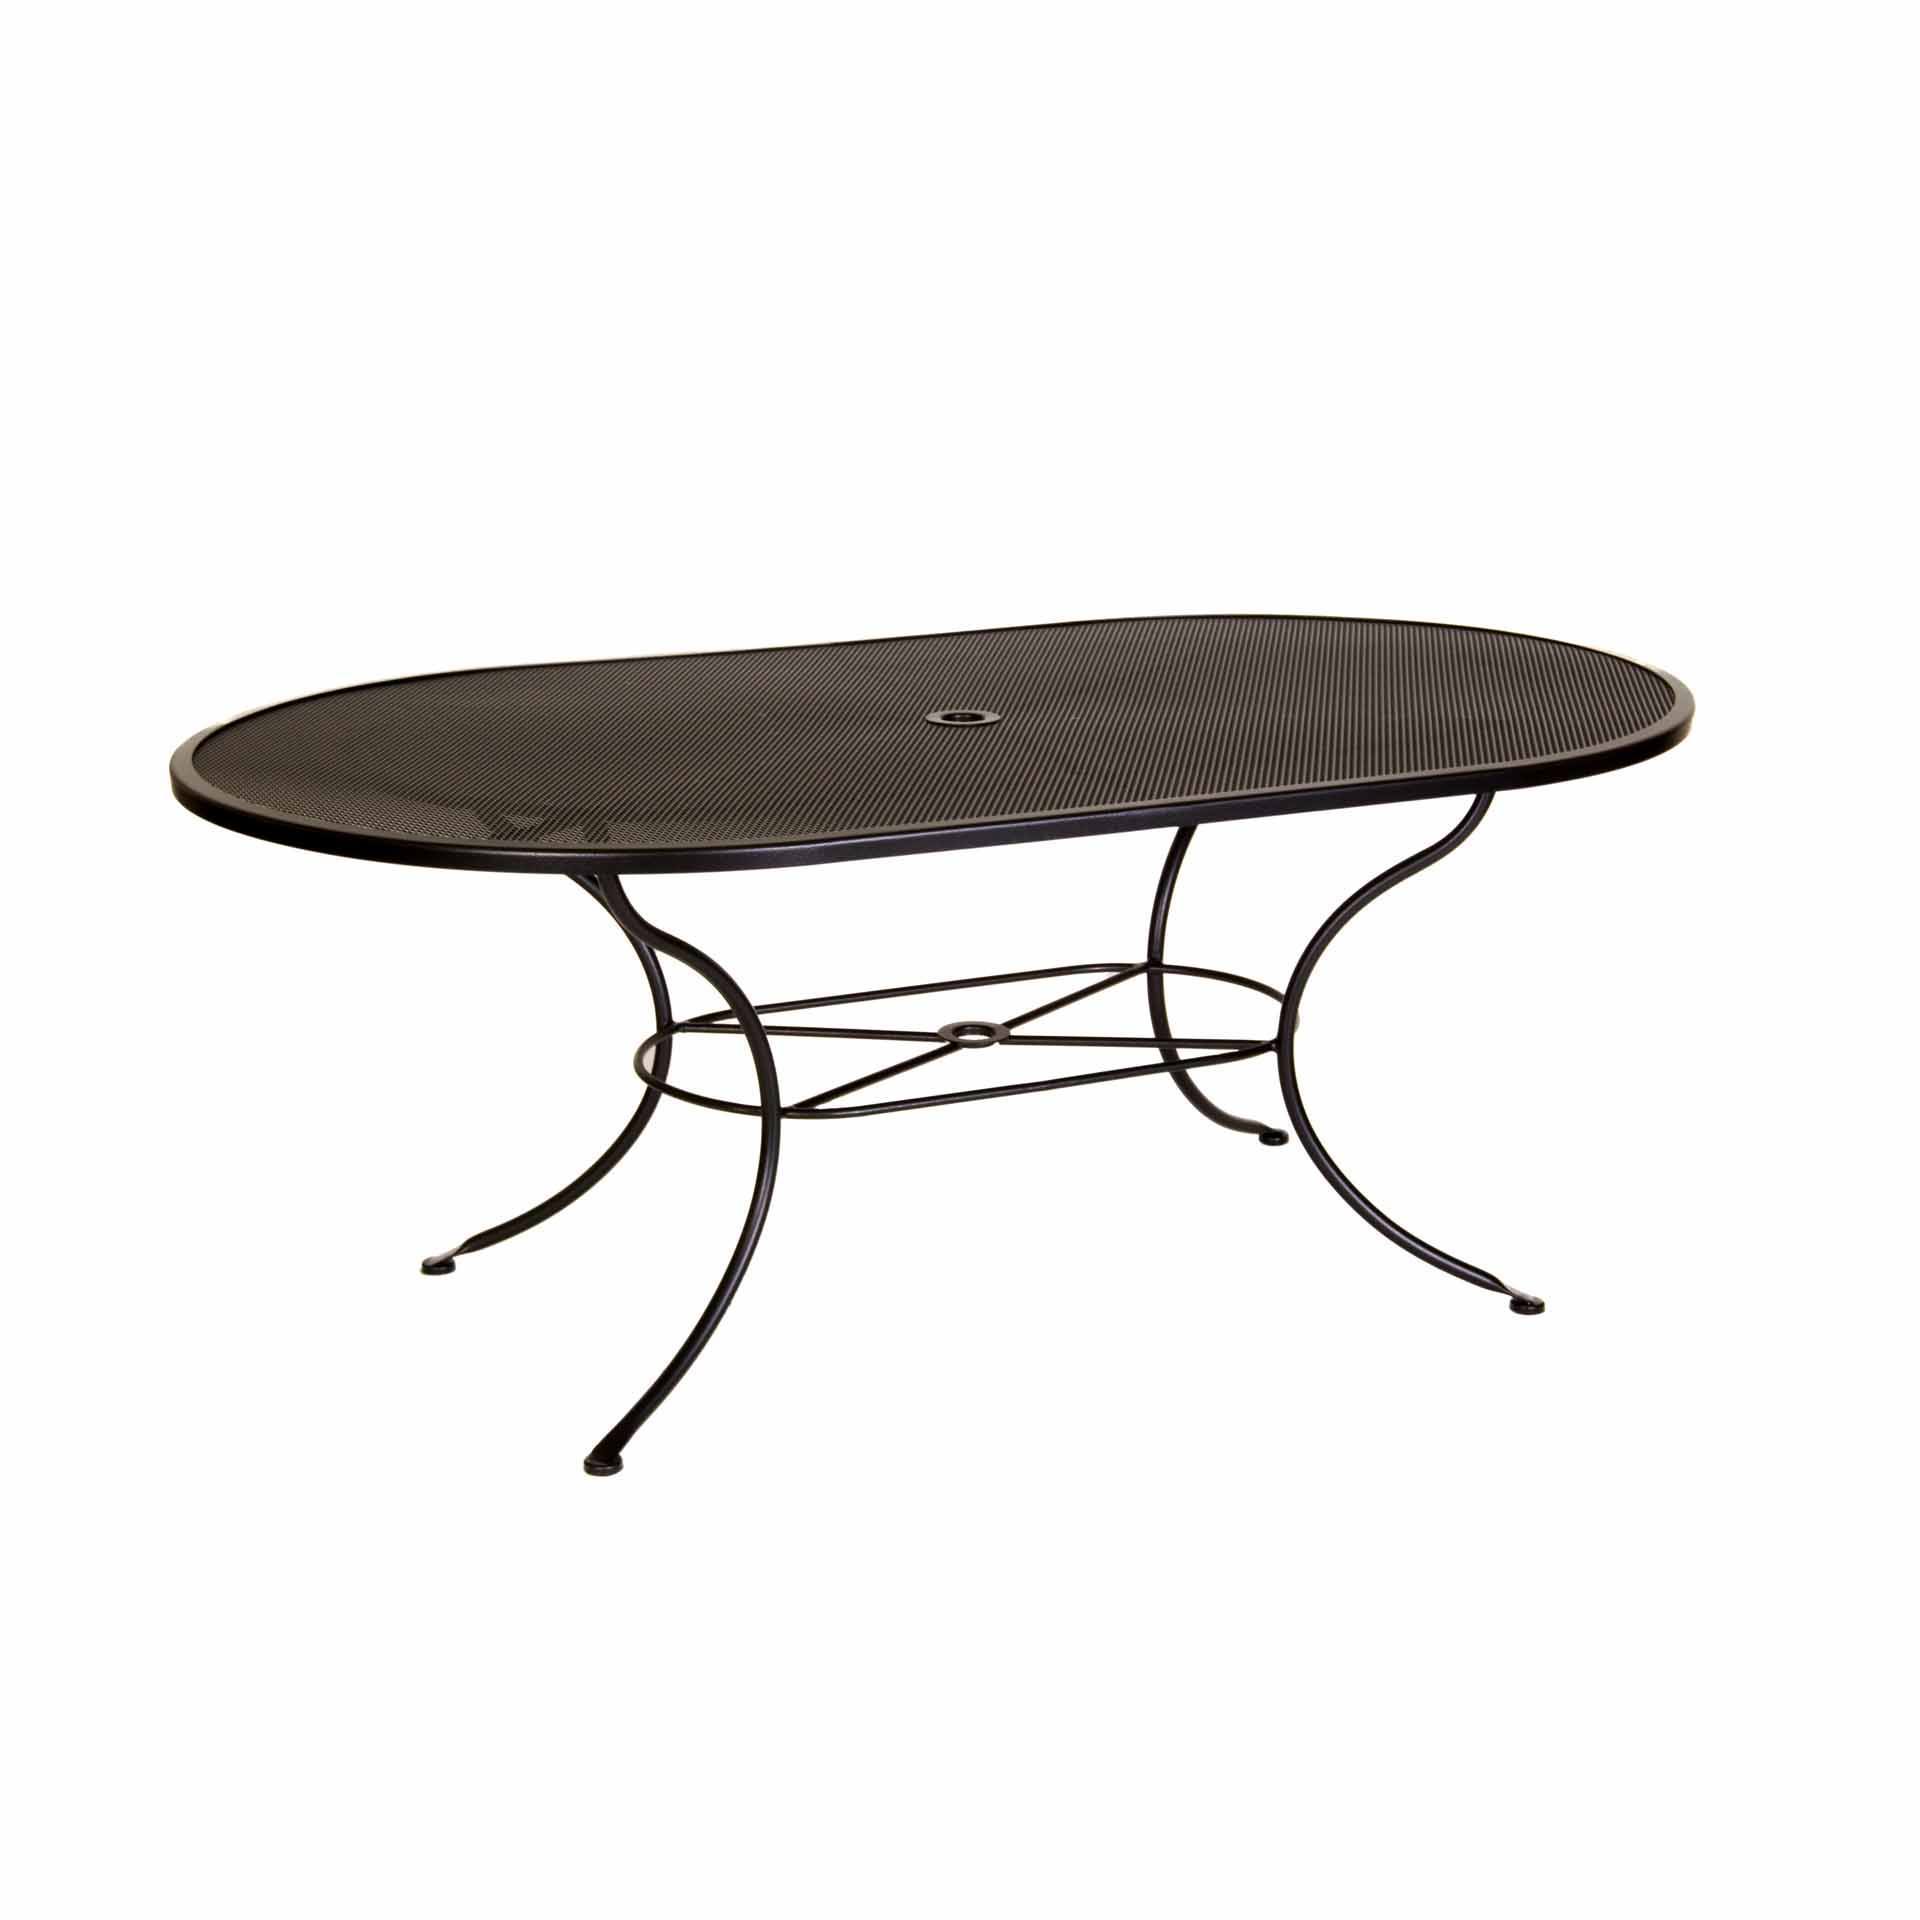 Ow Lee 72x42 Oval Micro Mesh Dining Table Leisure Living